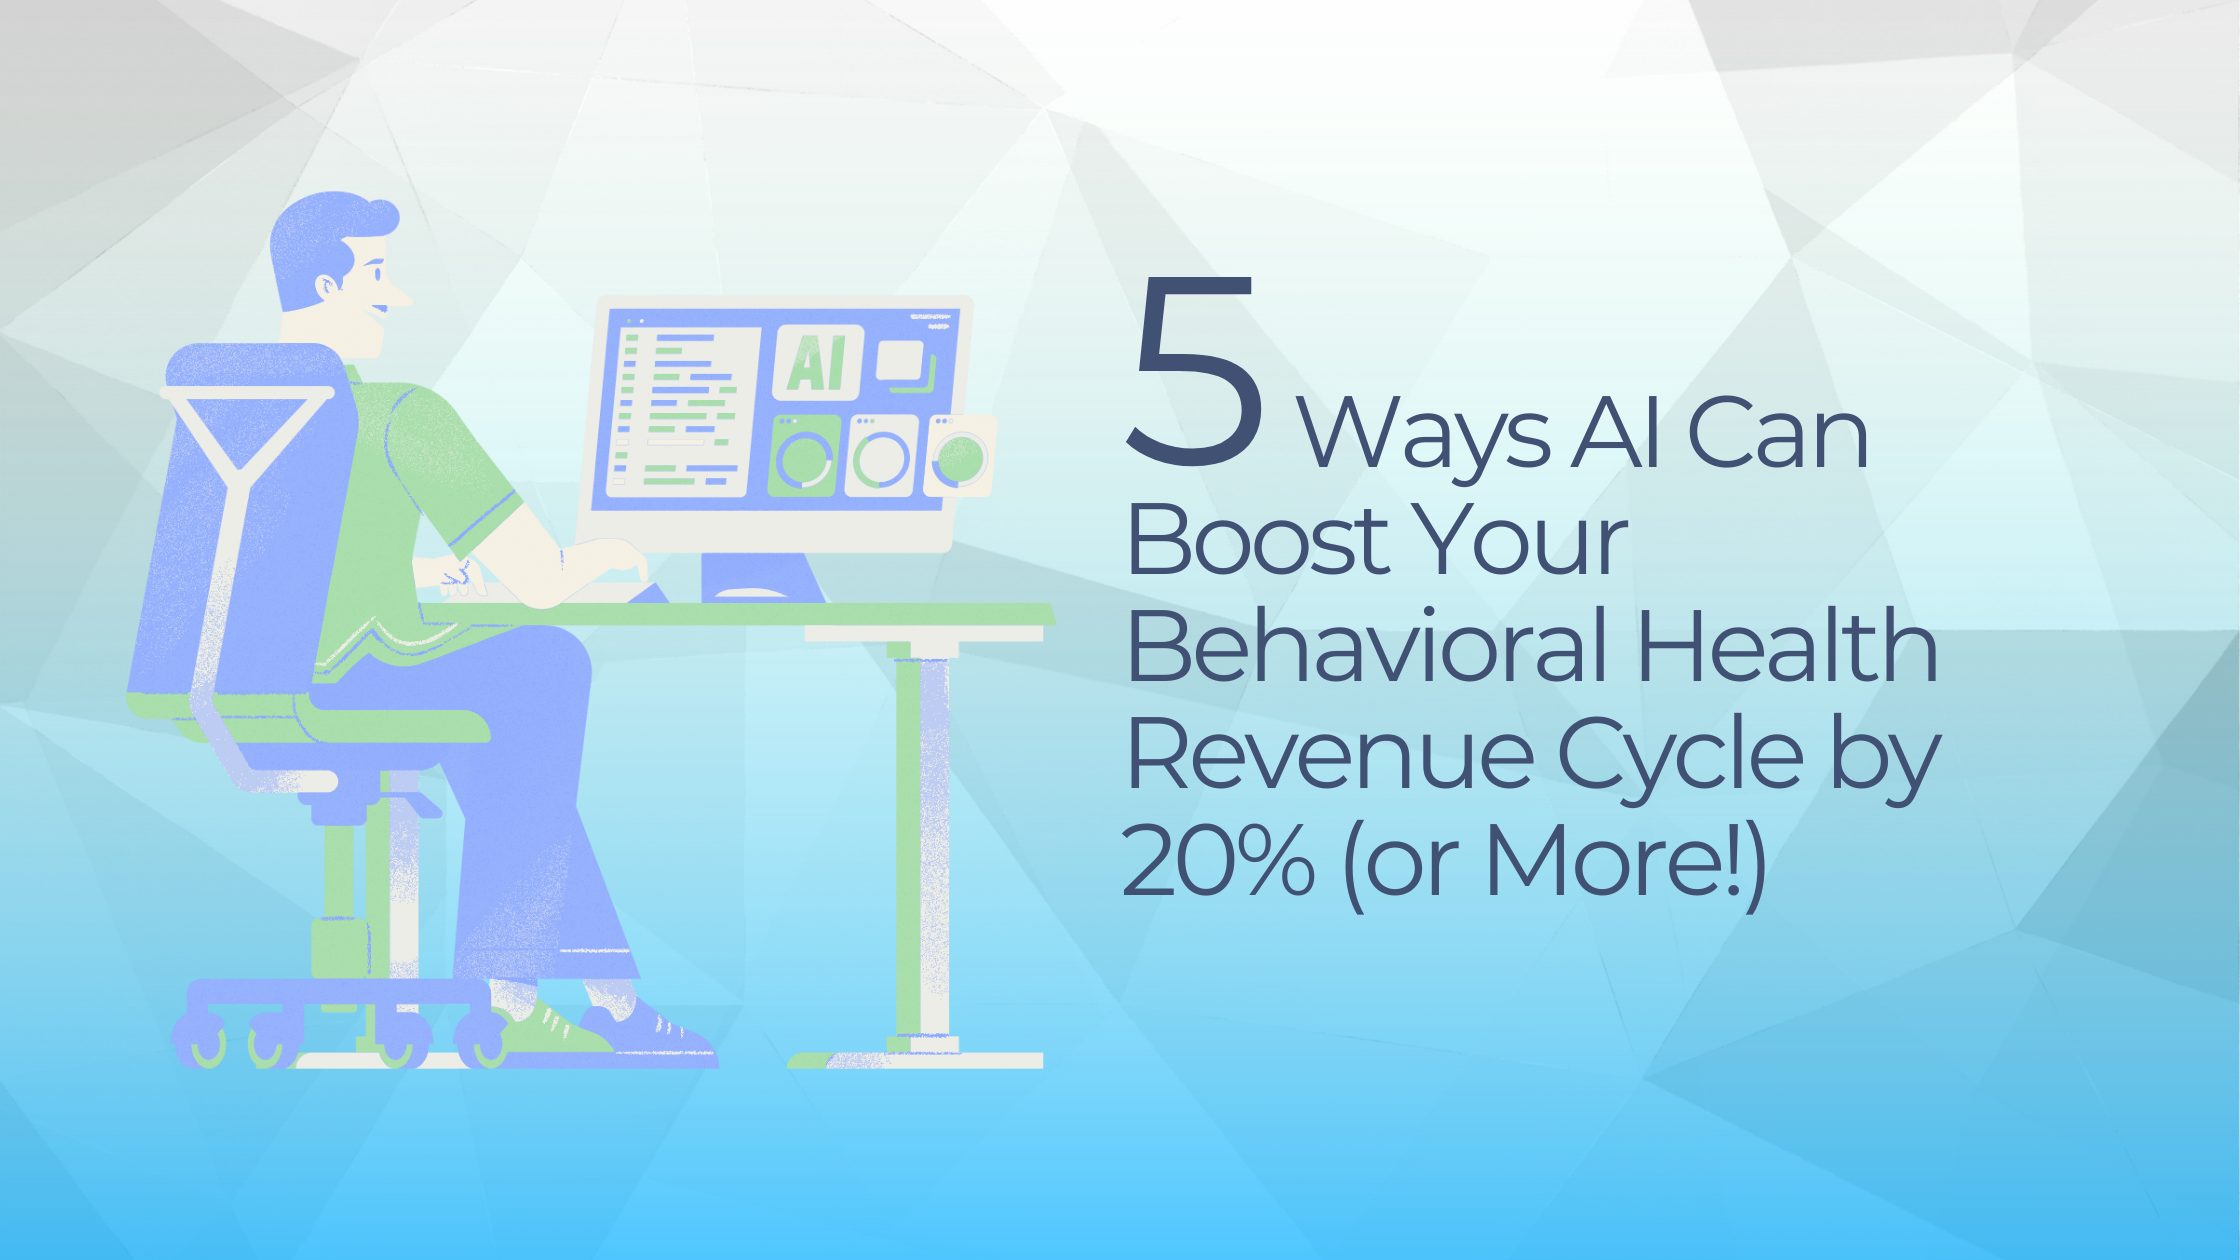 5 ways AI in behavioral health can boost revenue cycle by 20%